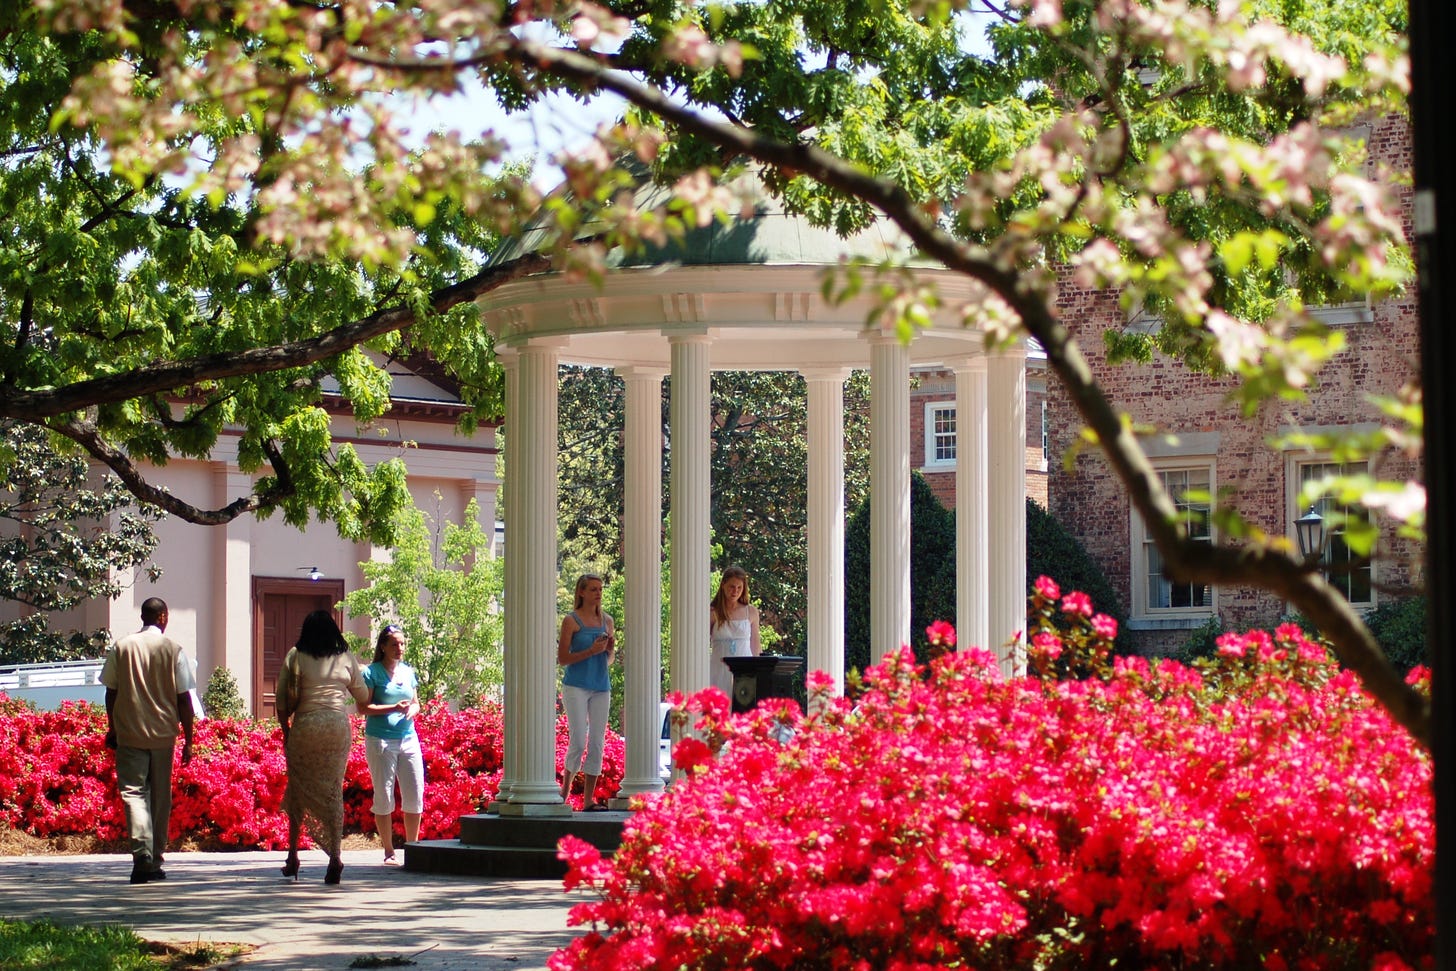 File:The "Old Well", center of campus, University of North Carolina, Chapel  Hill.jpg - Wikimedia Commons